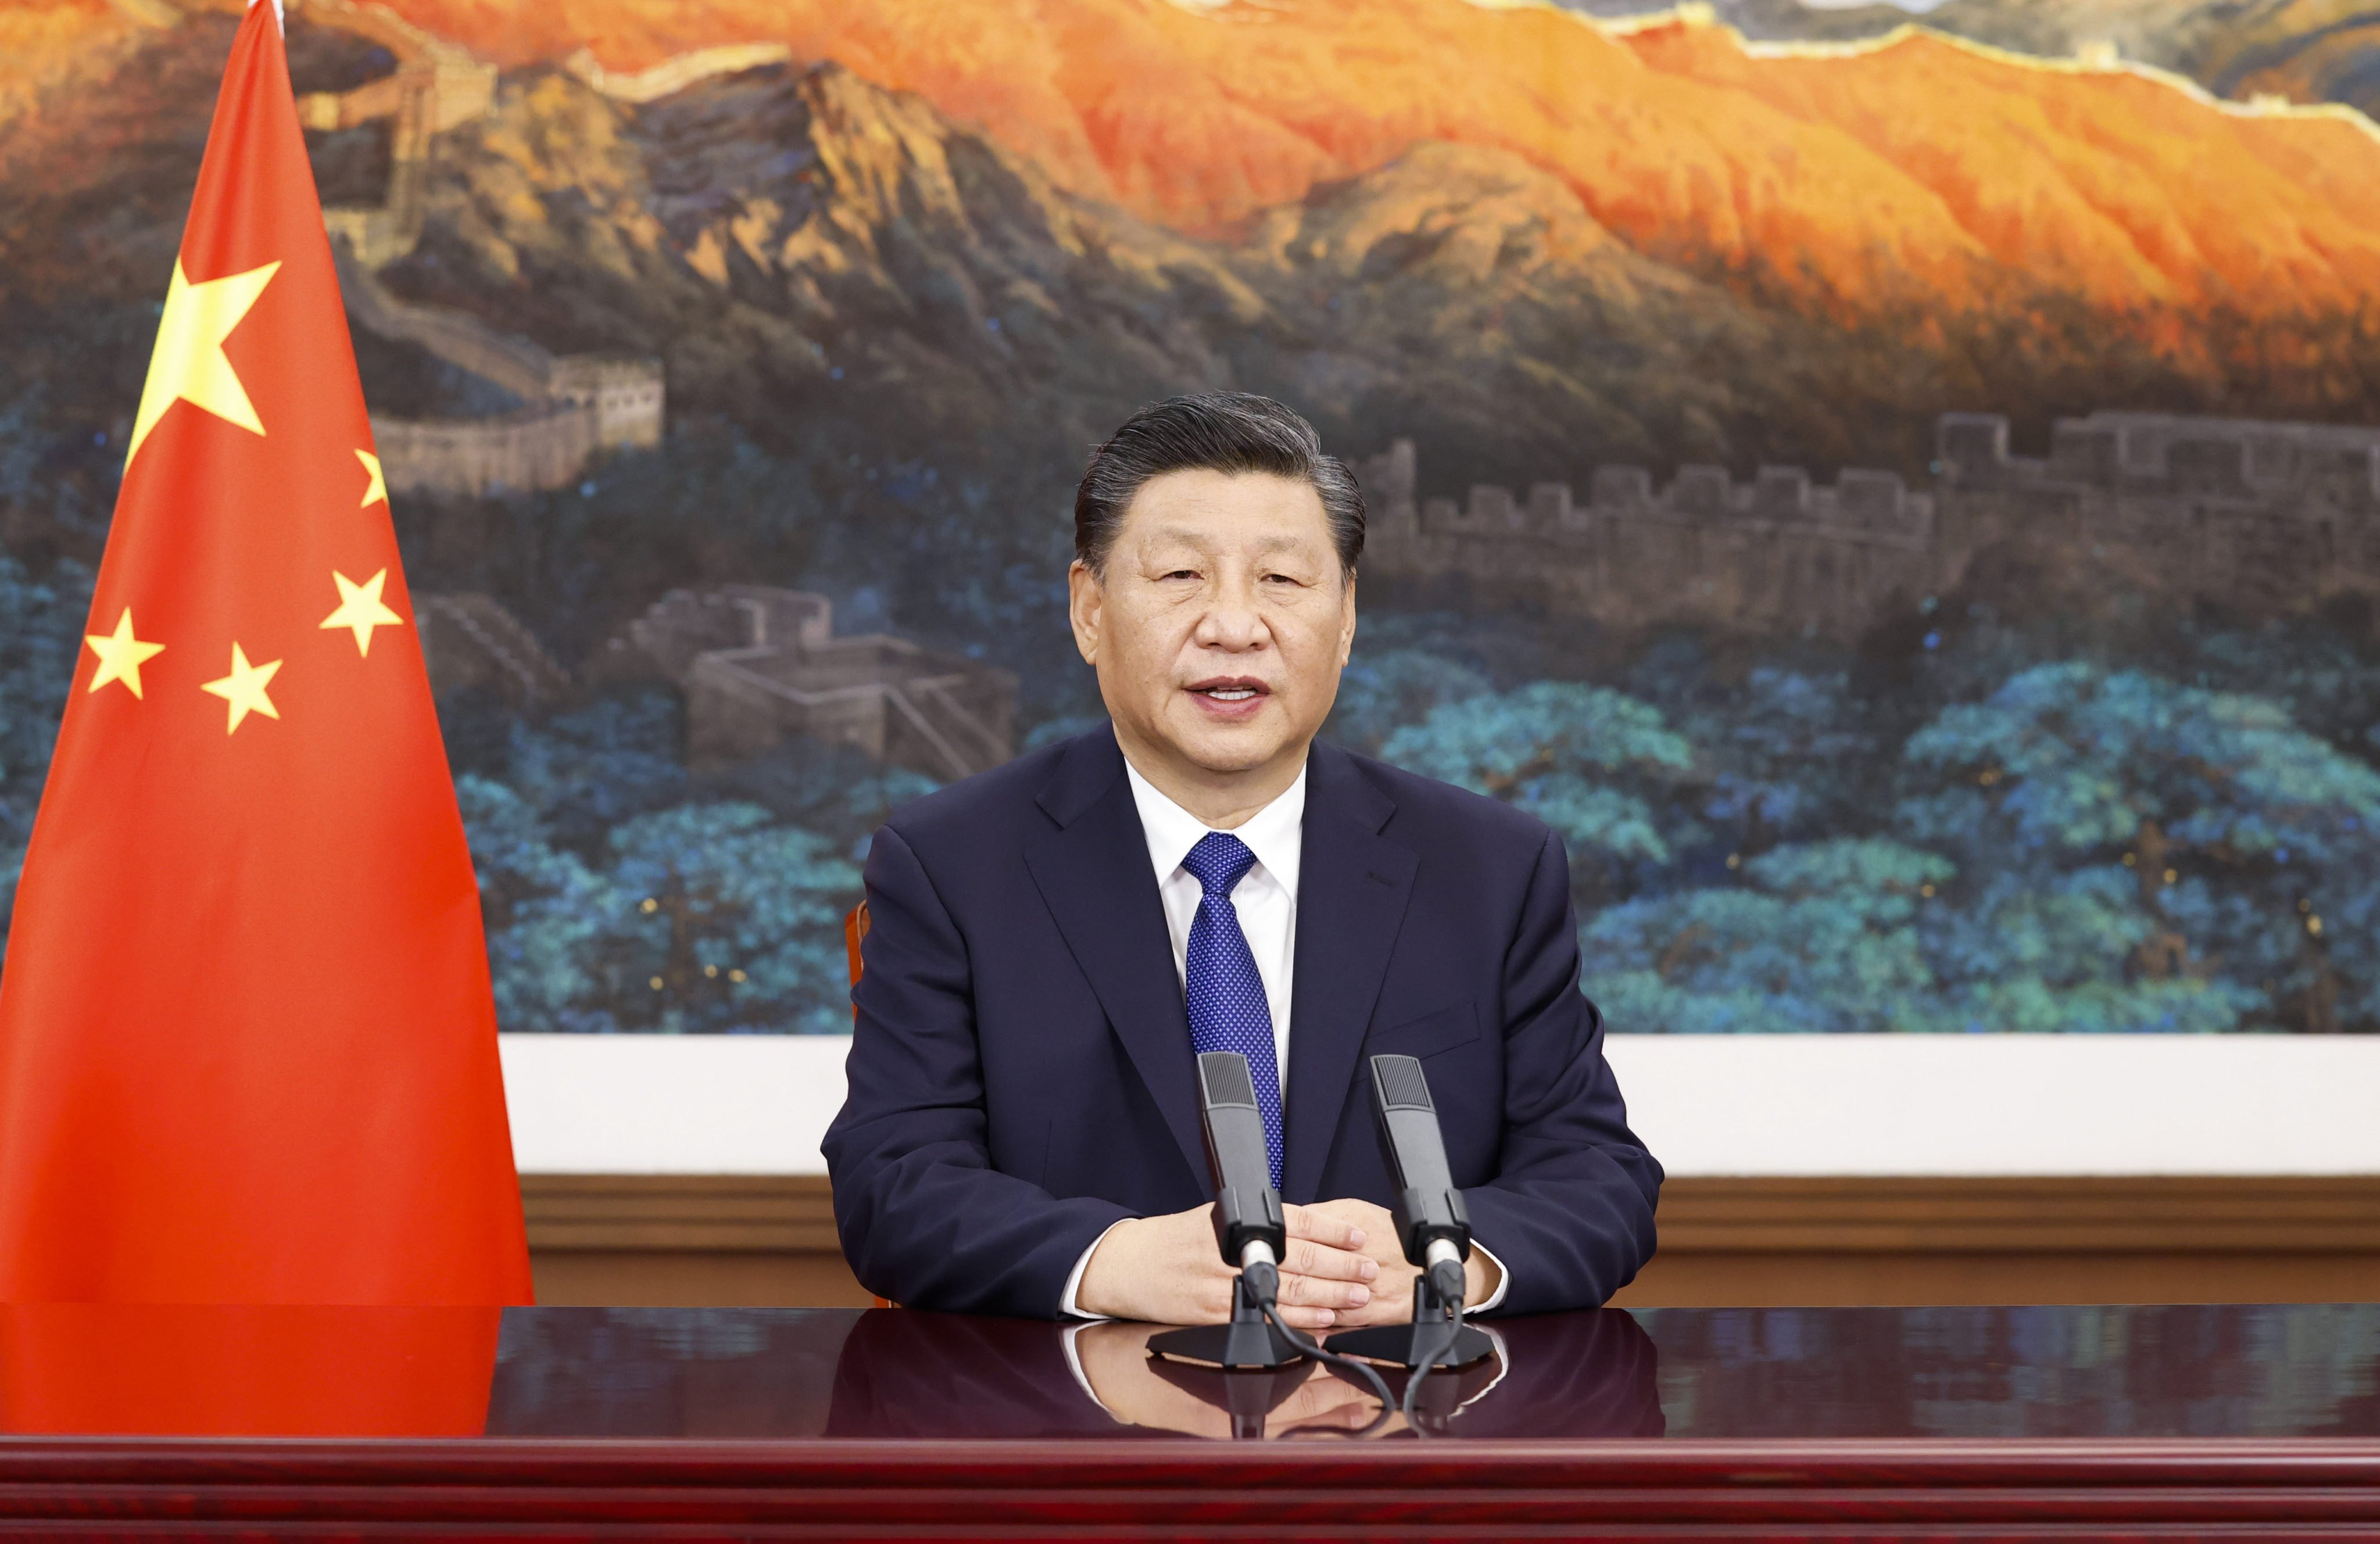 Chinese President Xi Jinping delivers a speech at the opening ceremony of the Imperial Springs International Forum via video in Beijing on Sunday. Photo: Xinhua